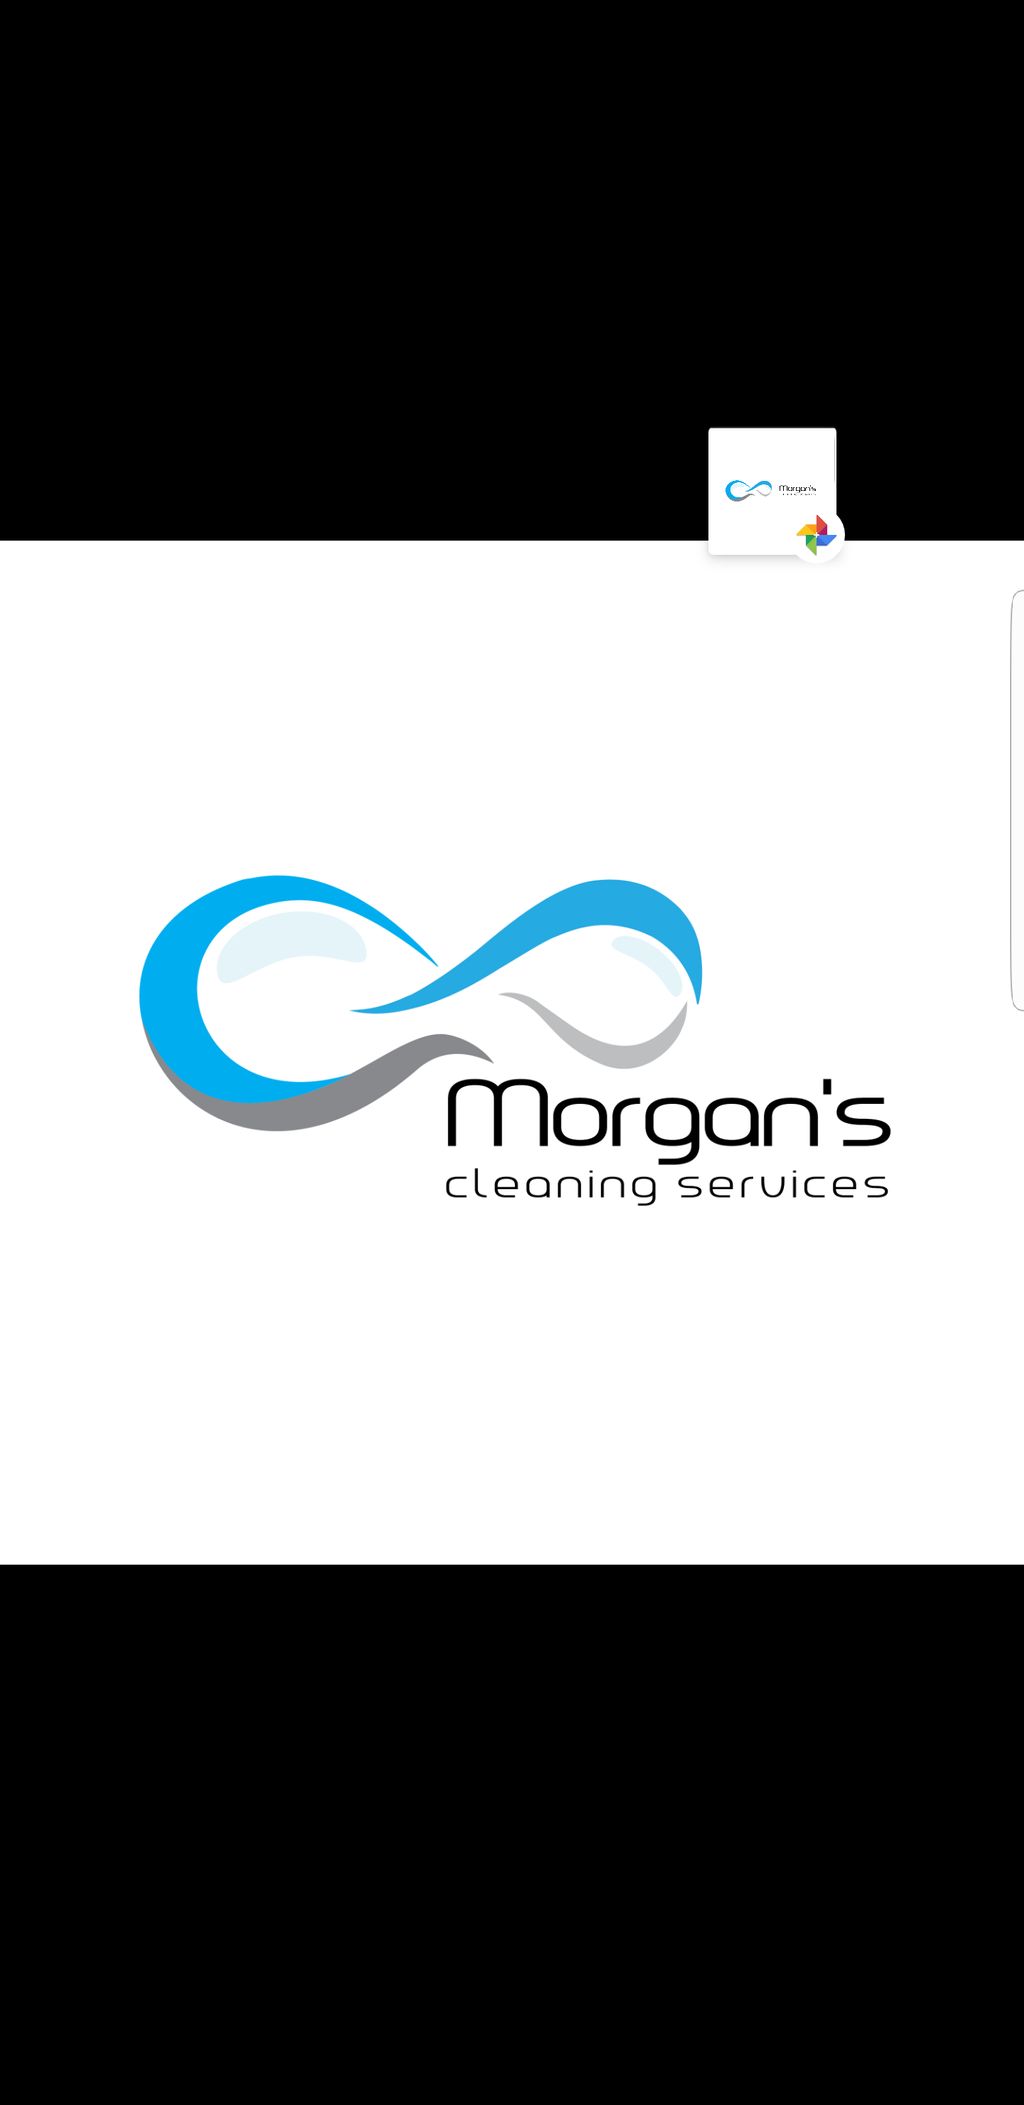 Morgan's Cleaning